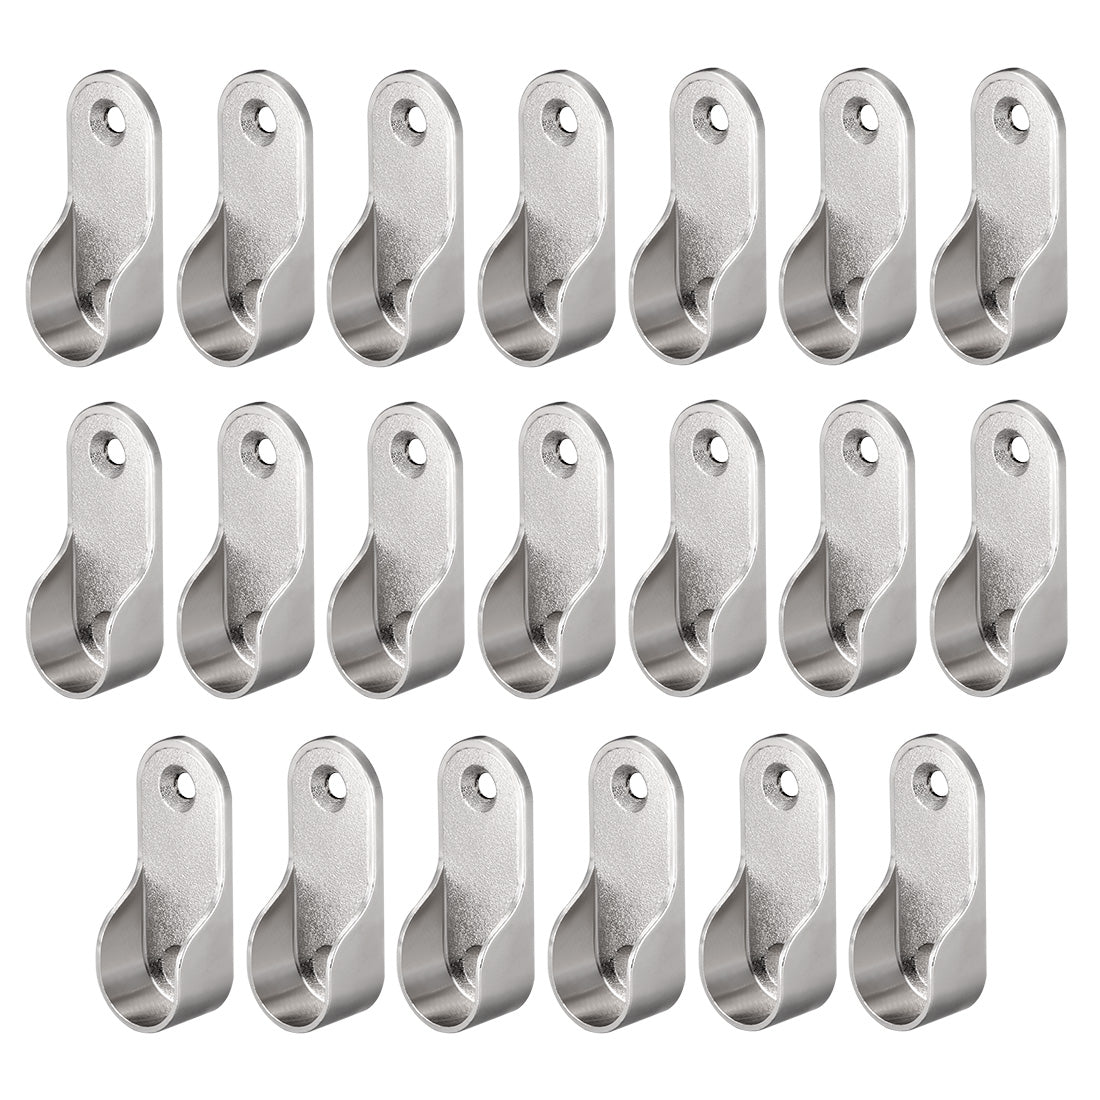 uxcell Uxcell Oval Closet Rod End Supports, Fit Rod Dia 16.5mm 20 PCS - Wardrobe Rod Flange Bracket Support - Nickel Plating